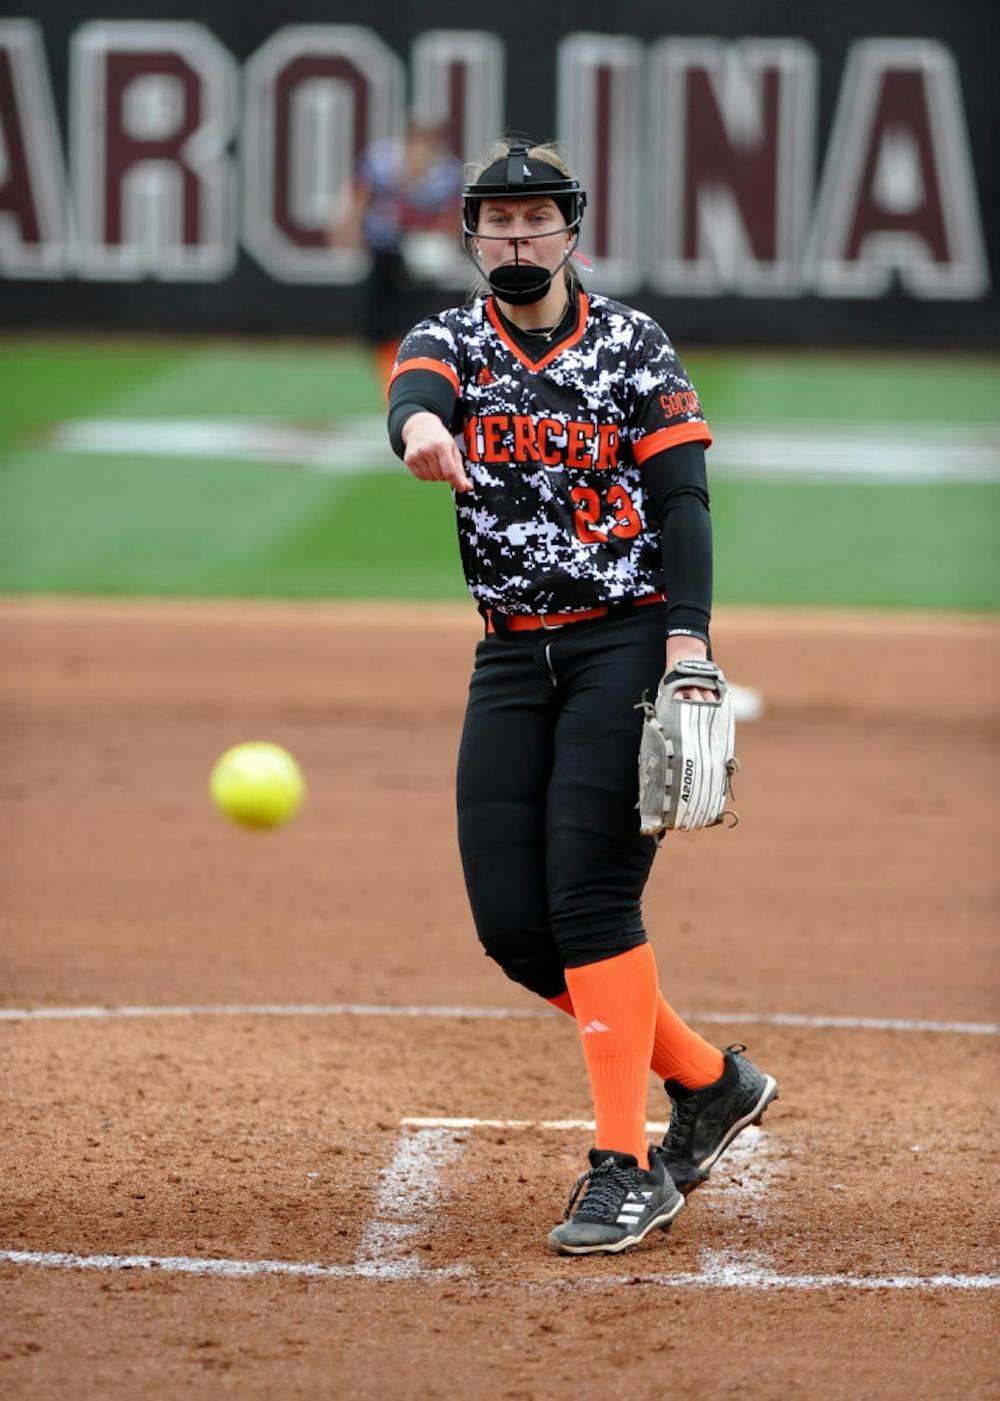 Pitcher Lauren O'Dell pitching at an away game.